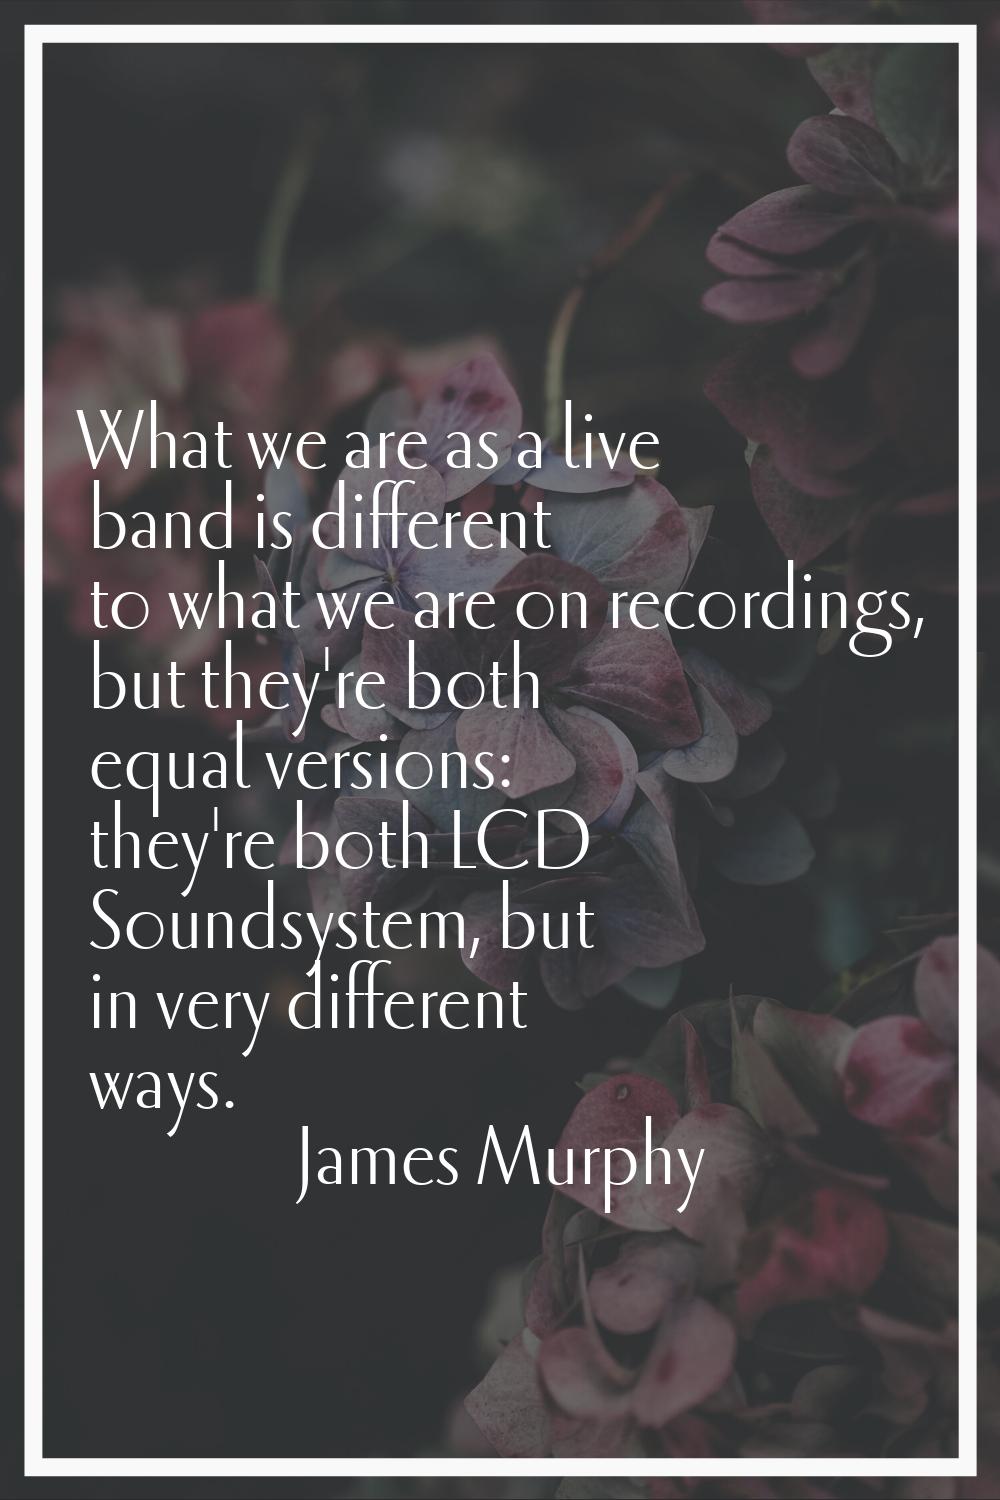 What we are as a live band is different to what we are on recordings, but they're both equal versio